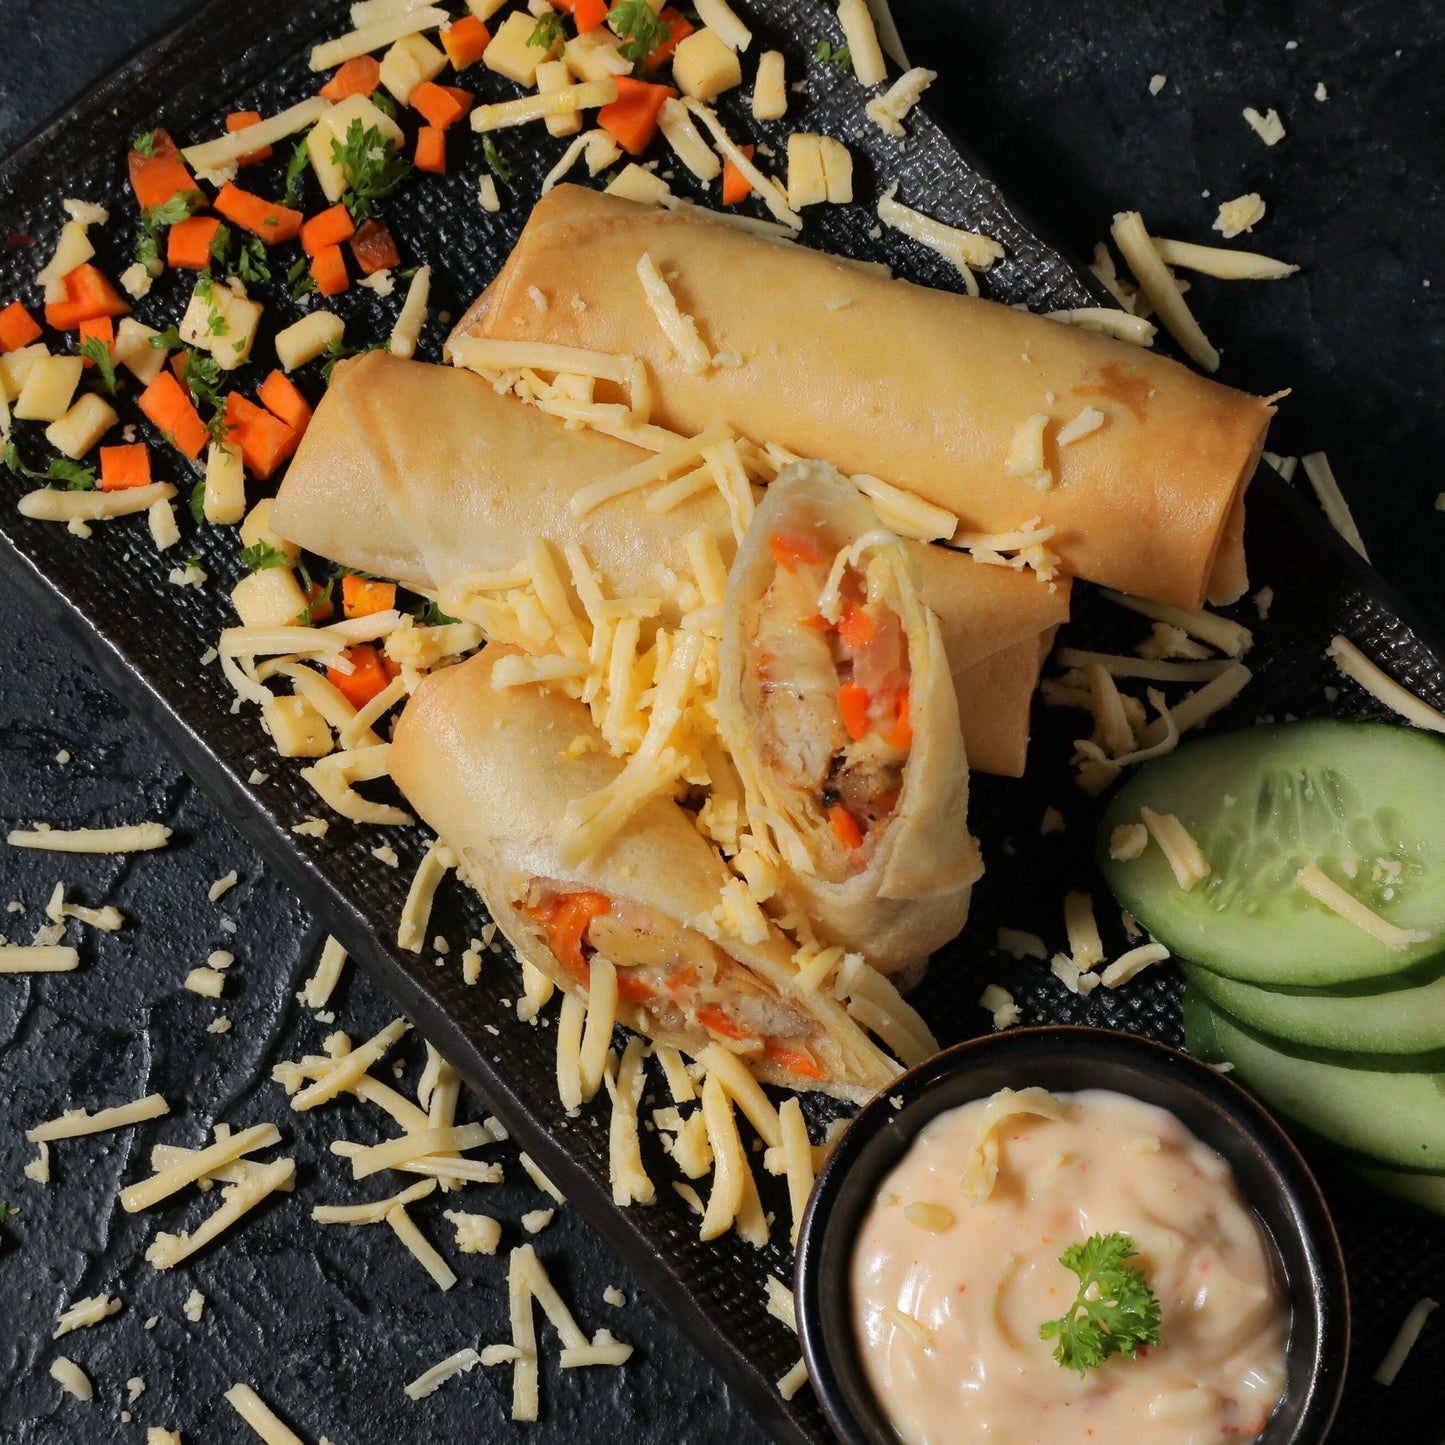 6 springs rolls with dippings + 2 noodles + 2 Mojitos of your choice for 2 people at Spring Rolls, One Galle face